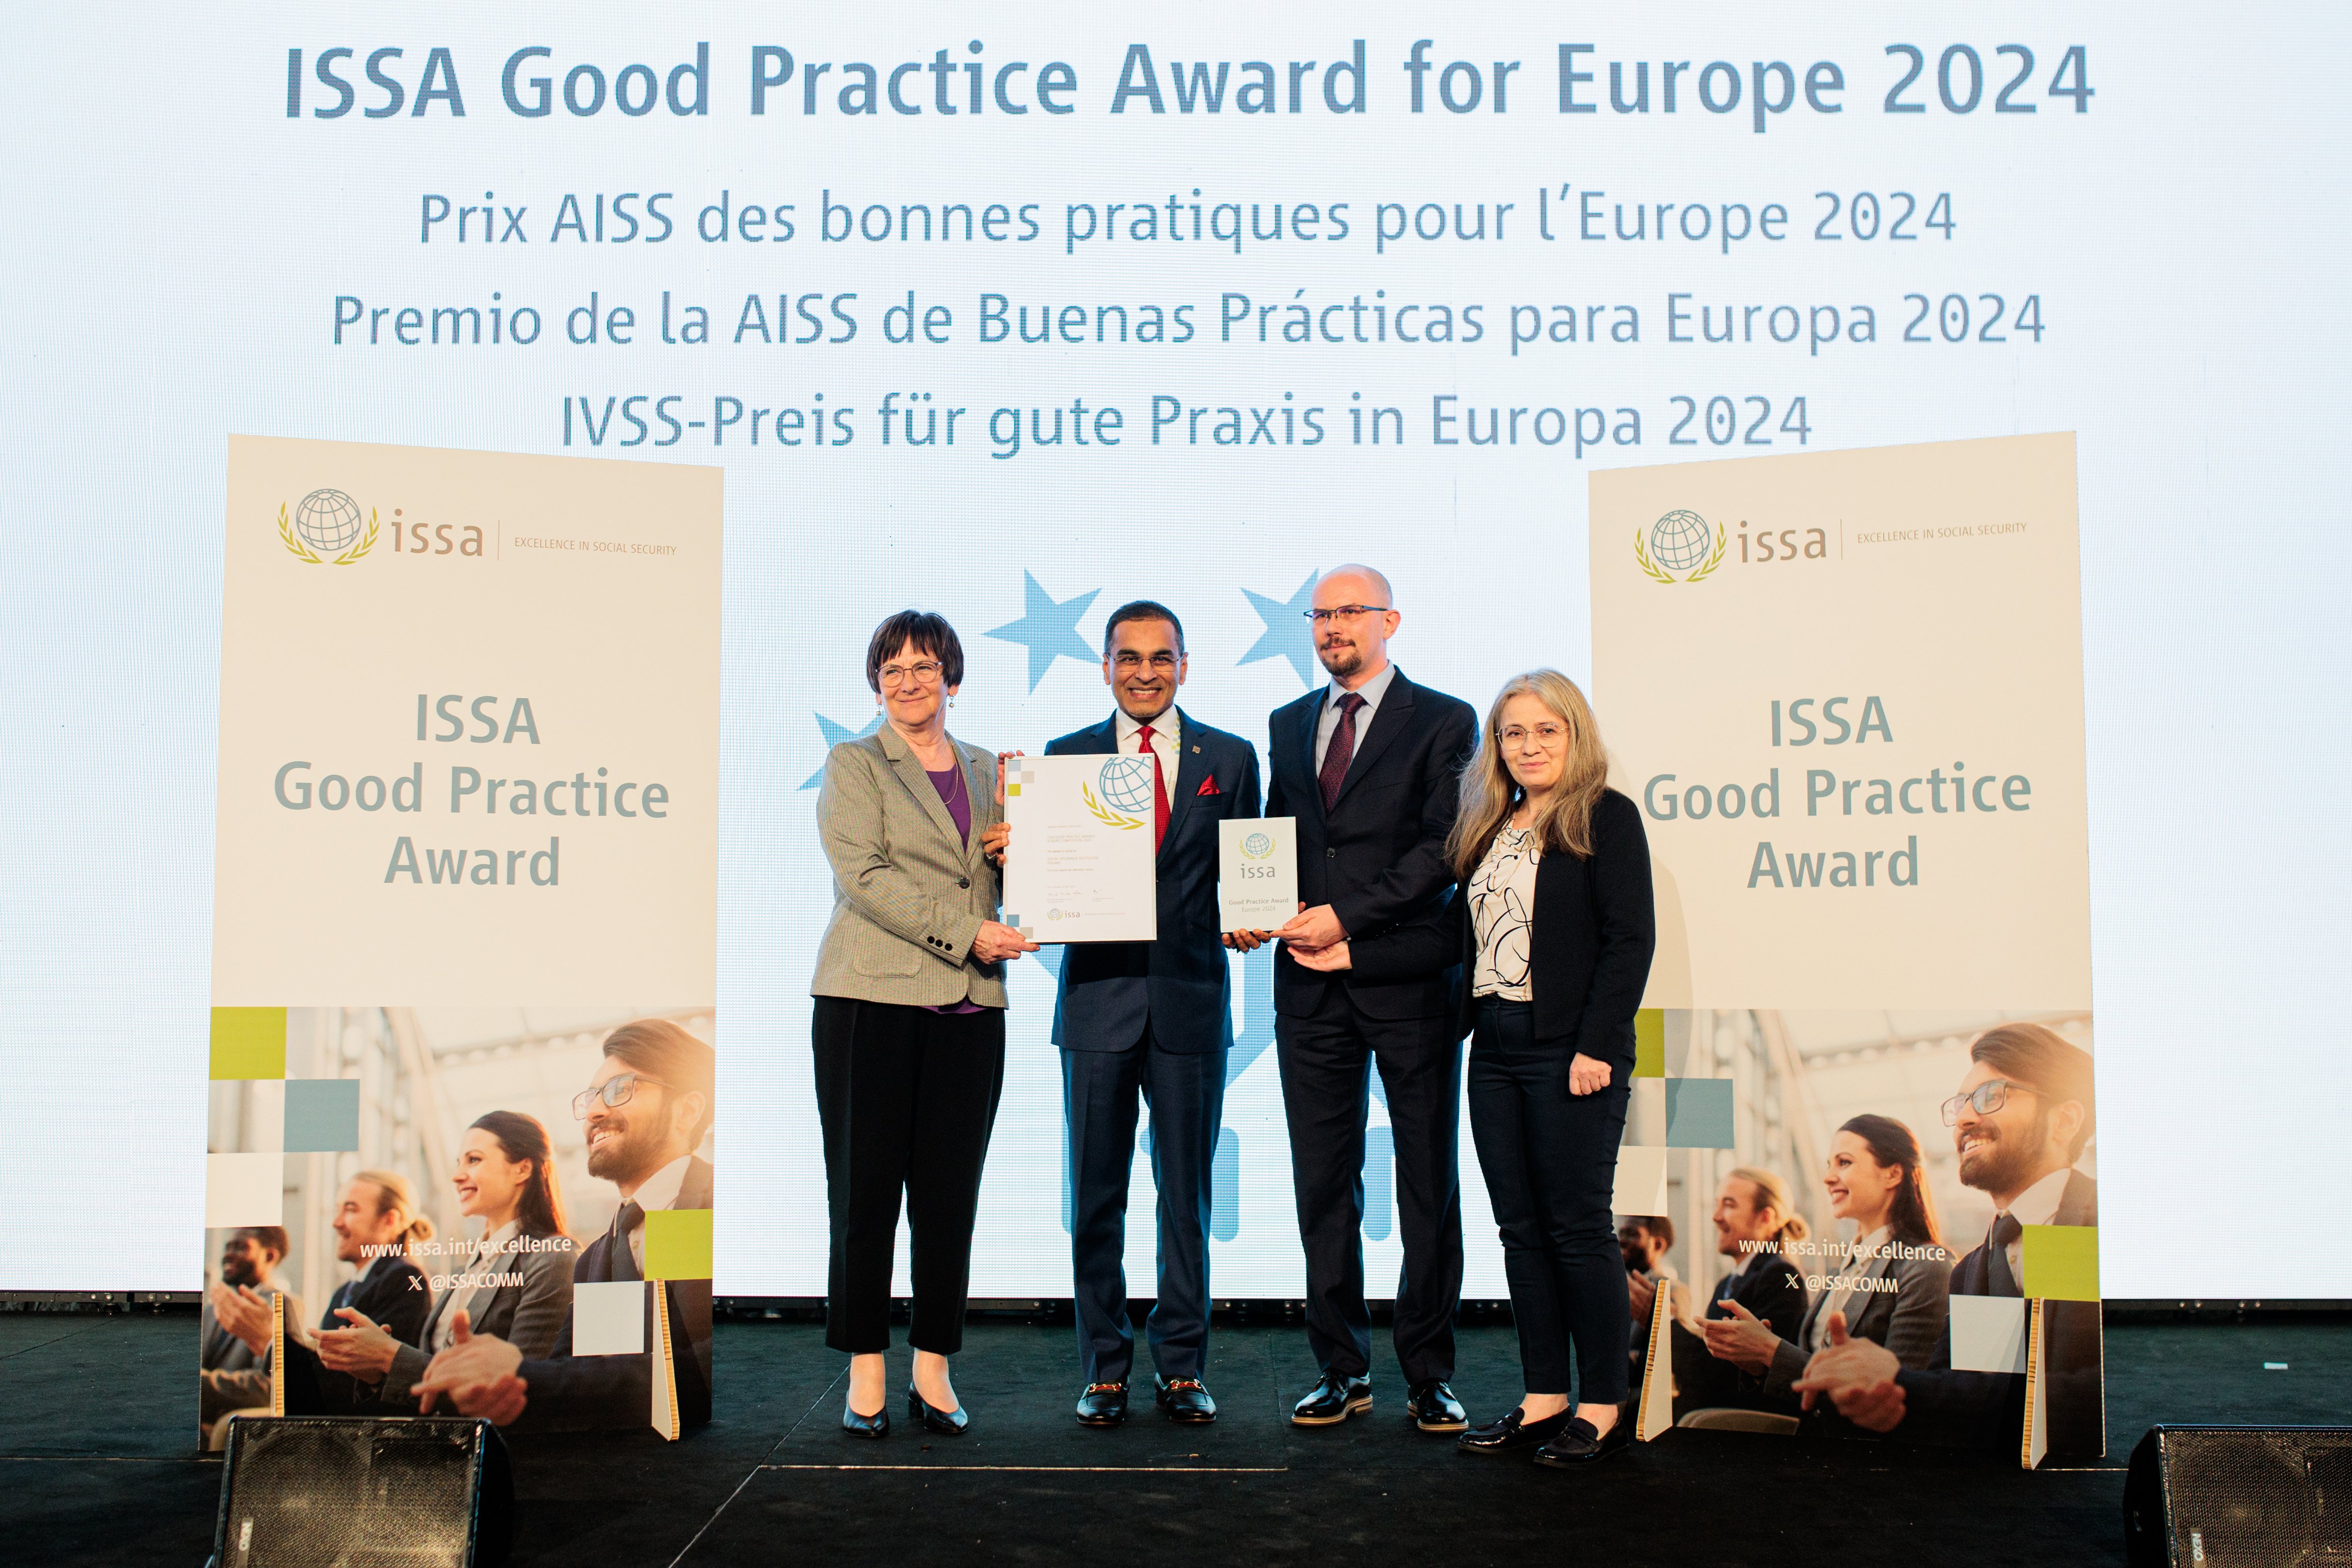 Poland wins the ISSA Good Practice Award for Europe 